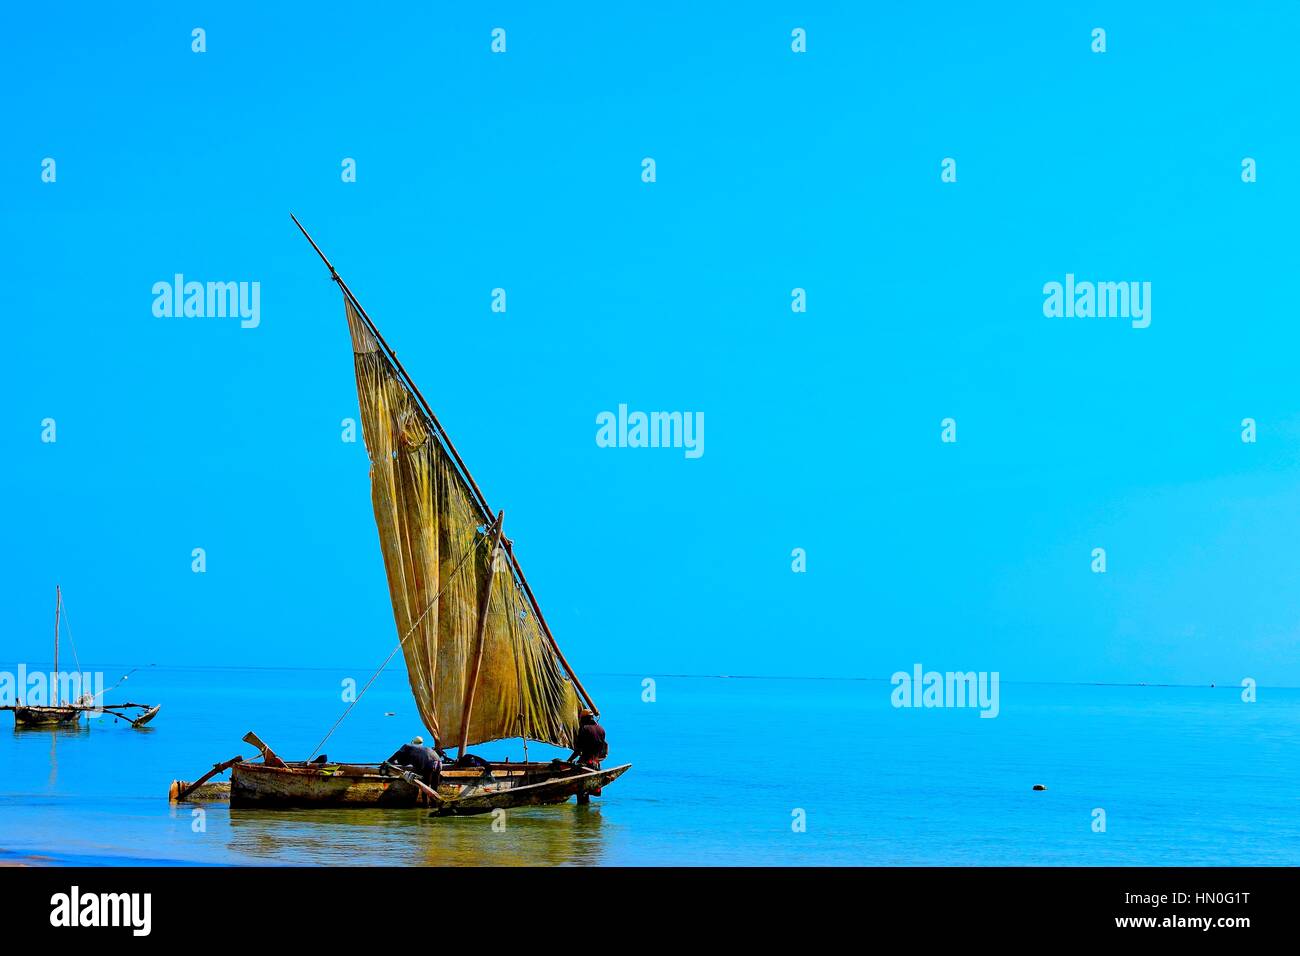 Sailing in the ocean as you enjoy and relax at the Diani Beach Stock Photo